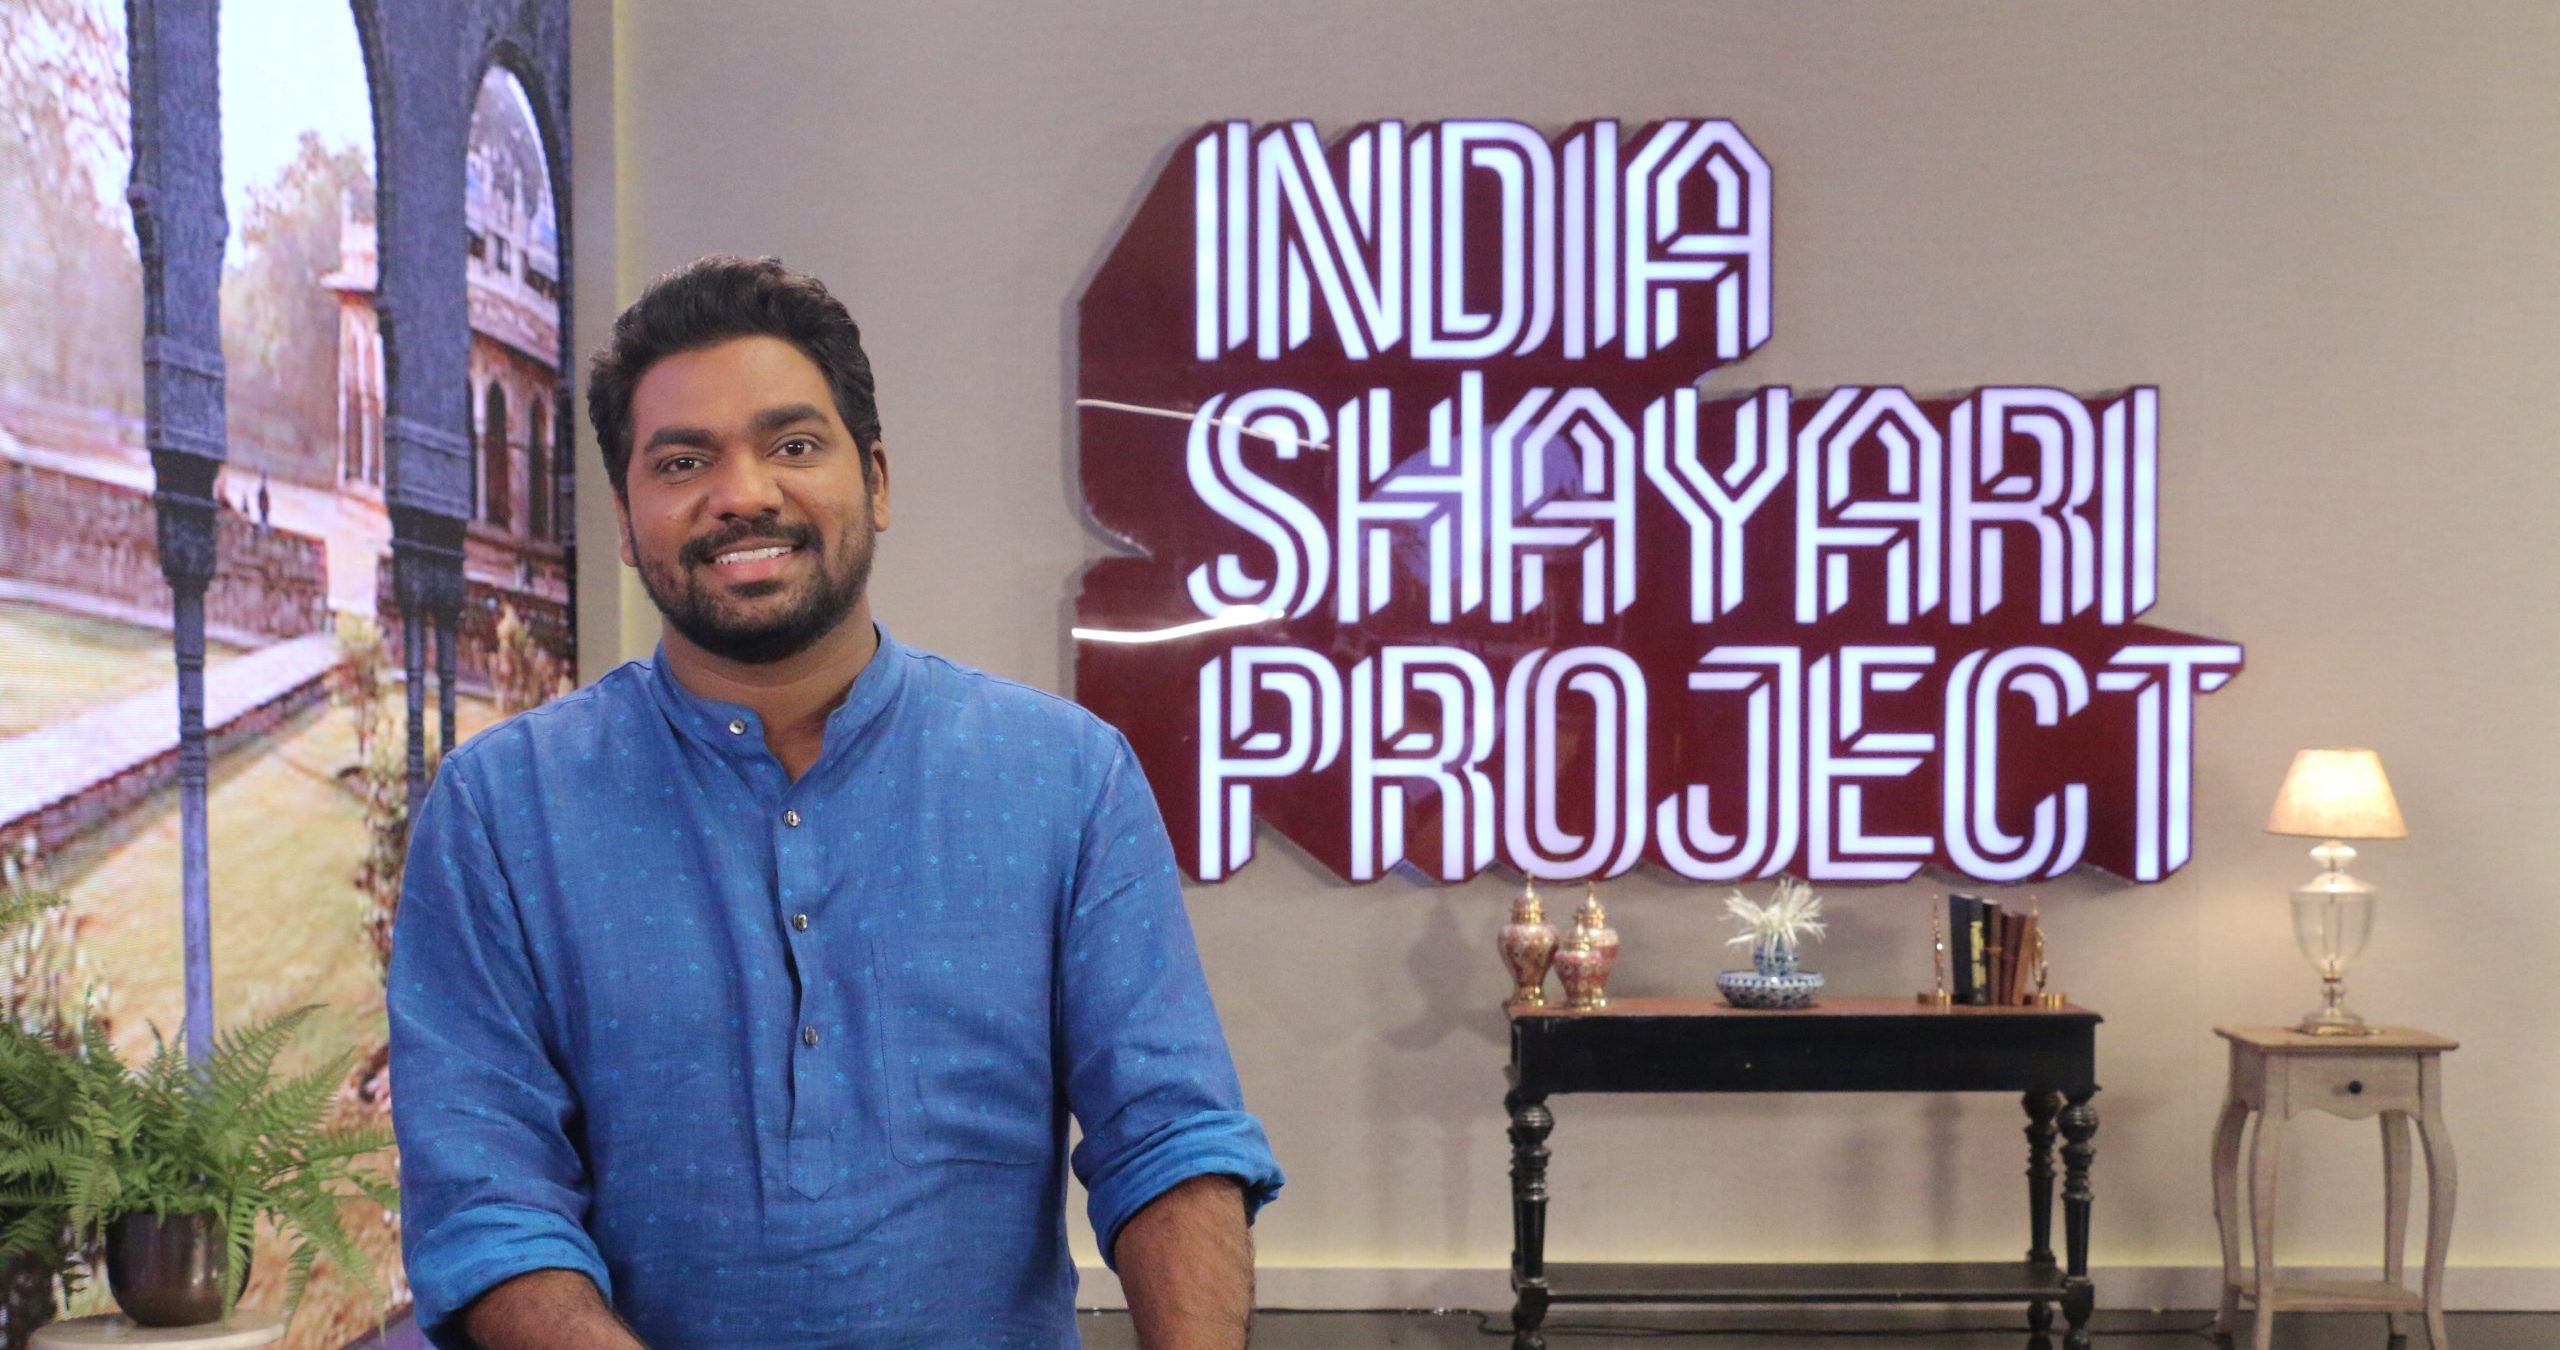 Javed Akhtar Sahab shares his thoughts on the present and future of Shayari in Zee Live’s India Shayari Project!